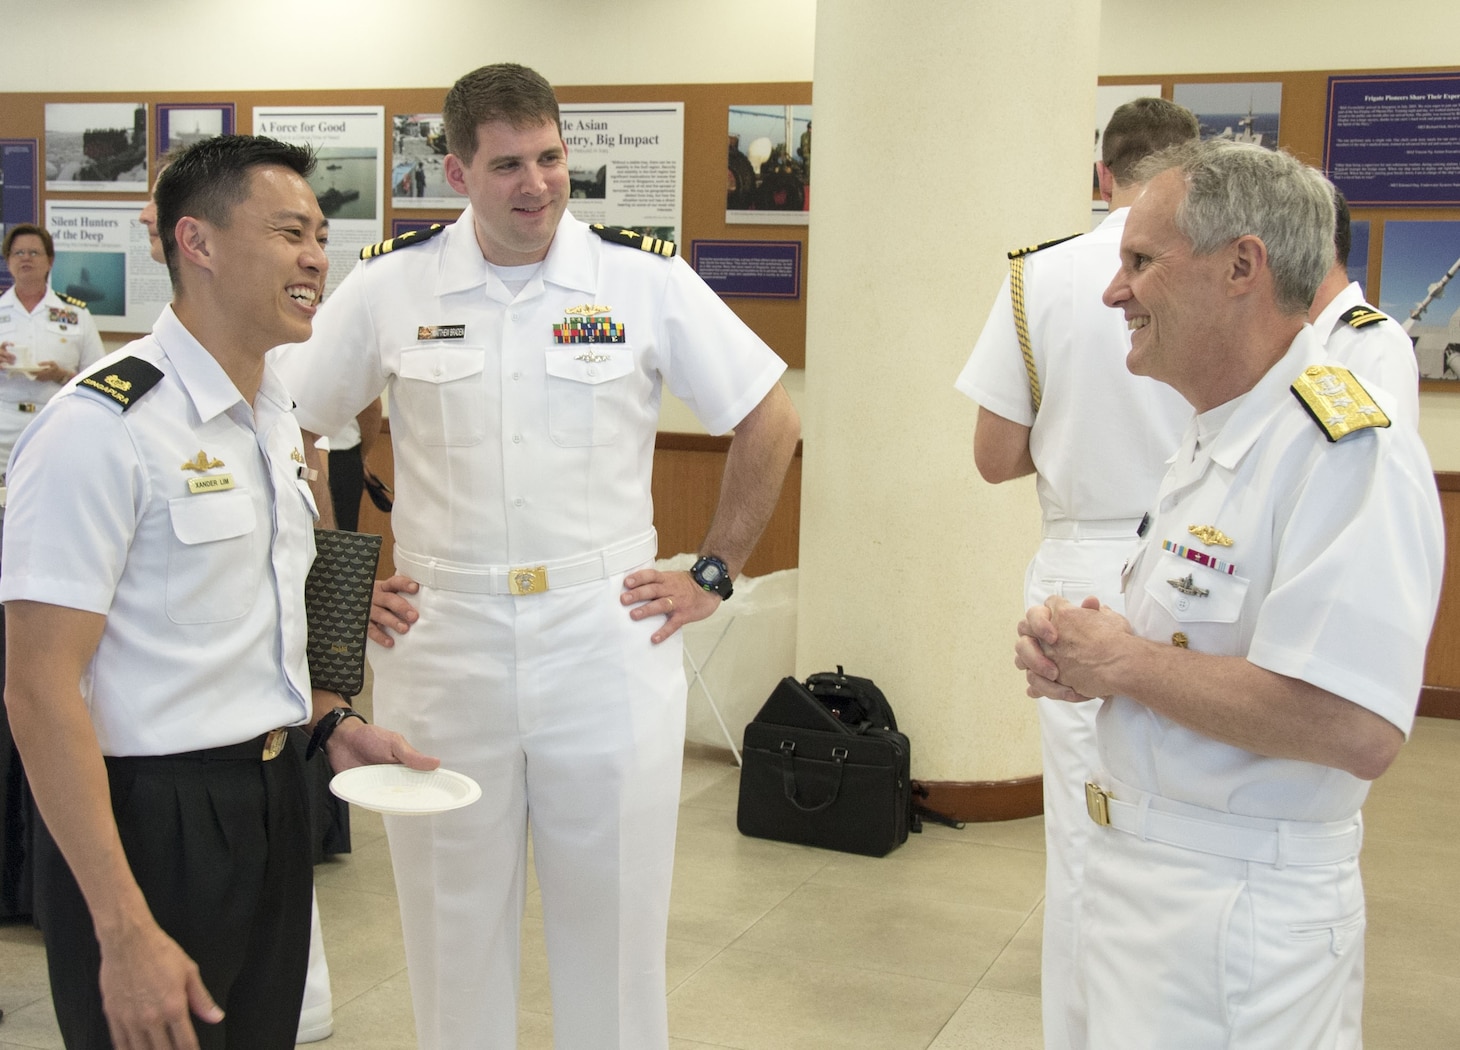 SINGAPORE (May 9, 2018) Vice Adm. Phillip G. Sawyer, commander, U.S. 7th Fleet, mingles with officers of the U.S. Navy and Republic of Singapore Navy at RSS Singapura - Changi Naval Base. U.S. 7th Fleet seeks to strengthen relationships and partnerships throughout the Indo-Pacific Region which 7th Fleet has patrolled for more than 75 years, promoting and enhancing regional security and stability.